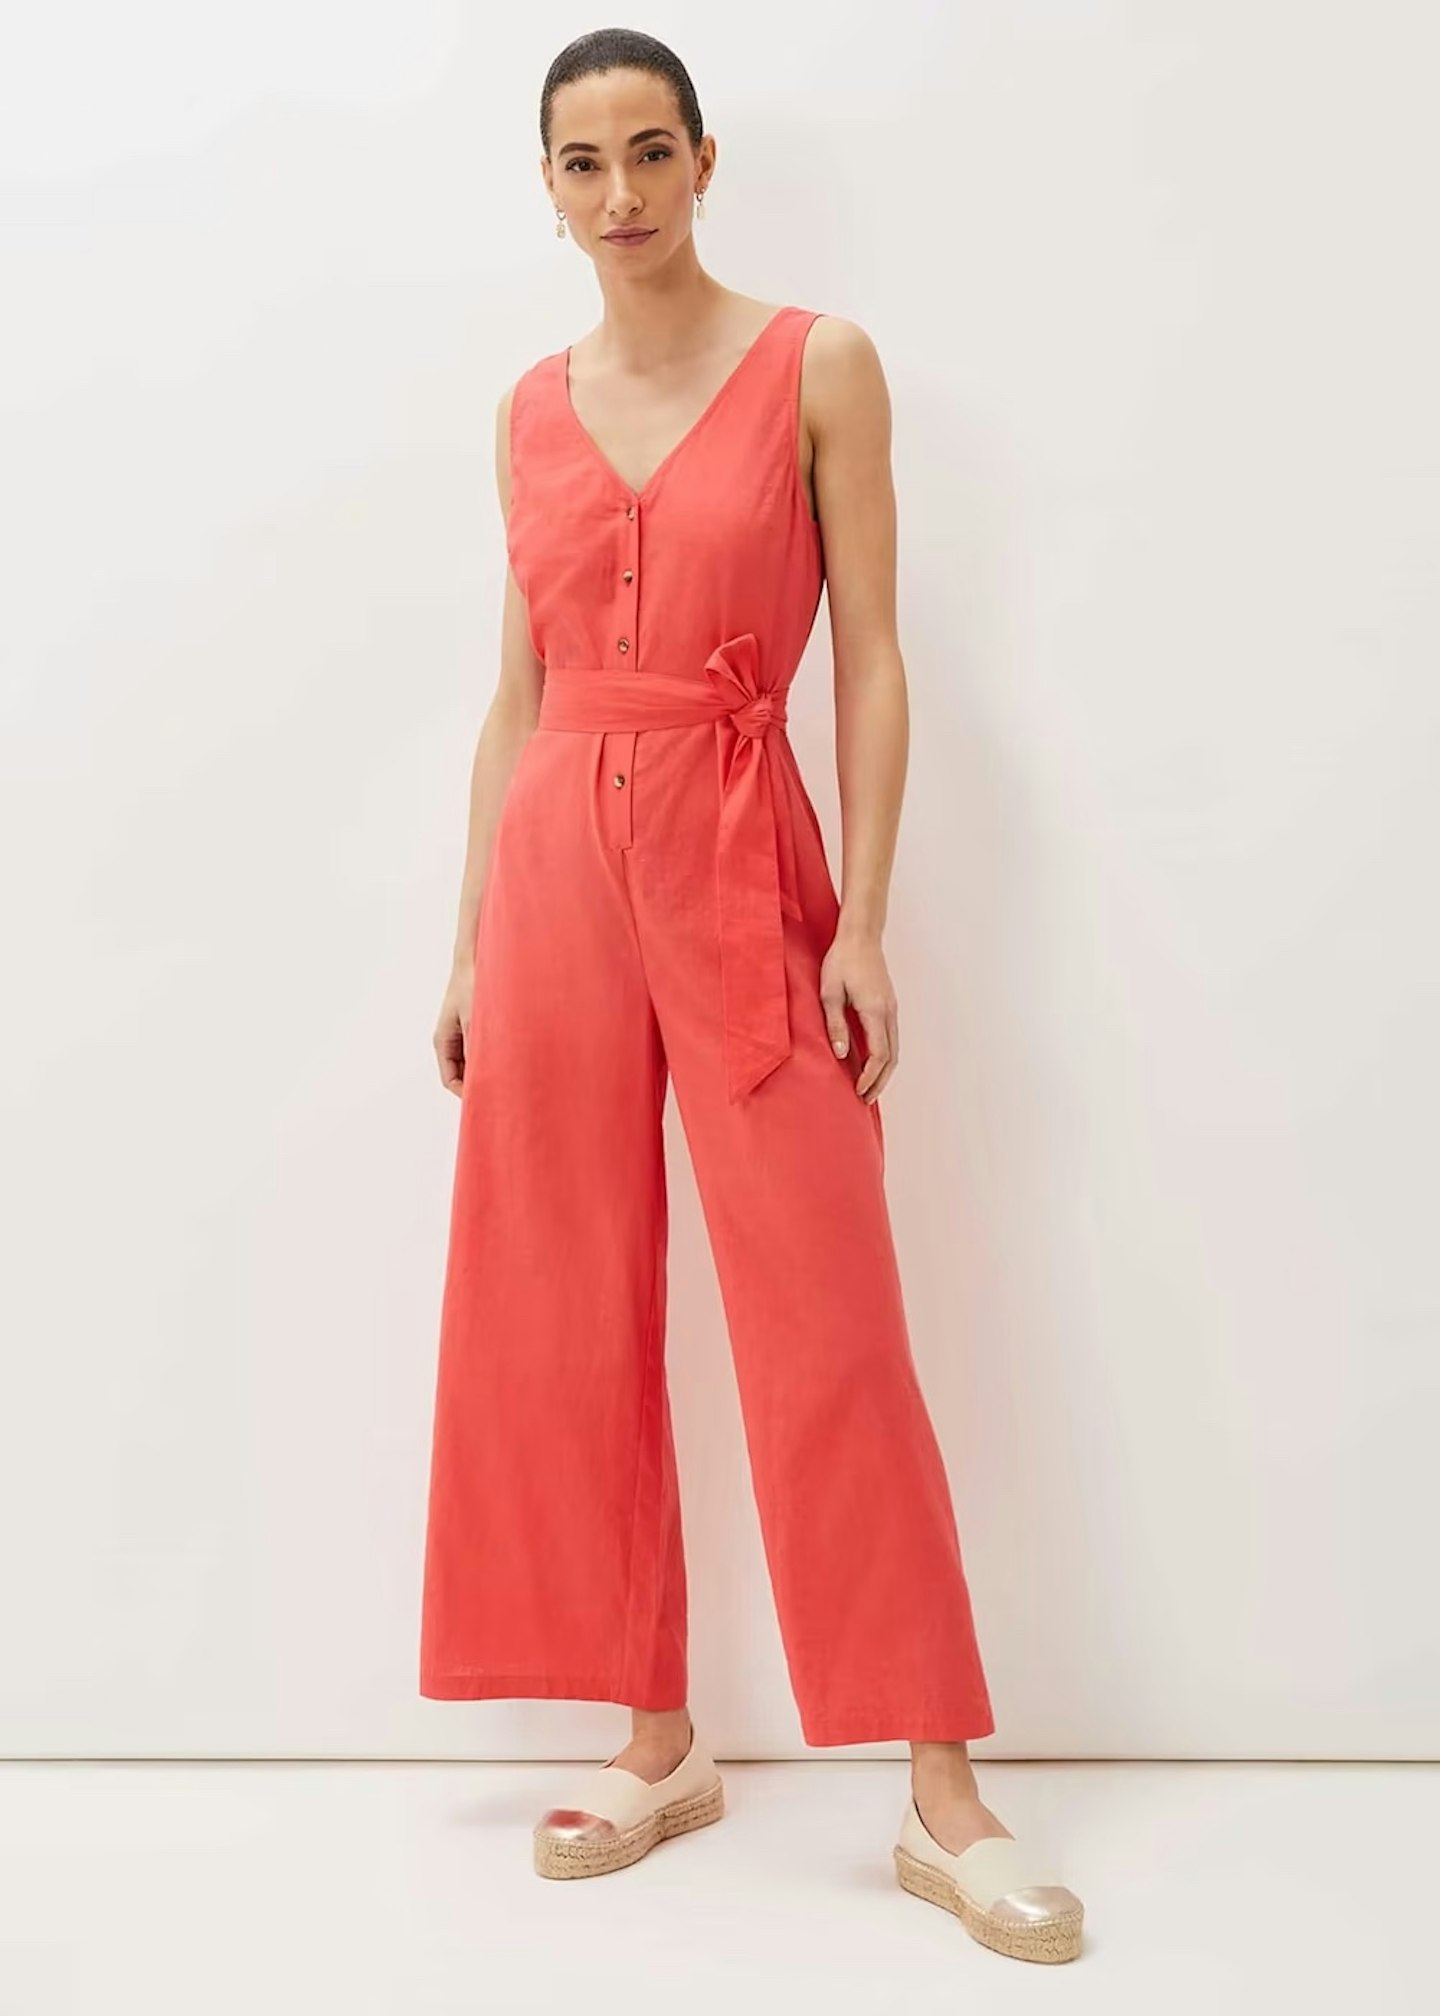 coral jumpsuit inspired by sophie raworth outfits